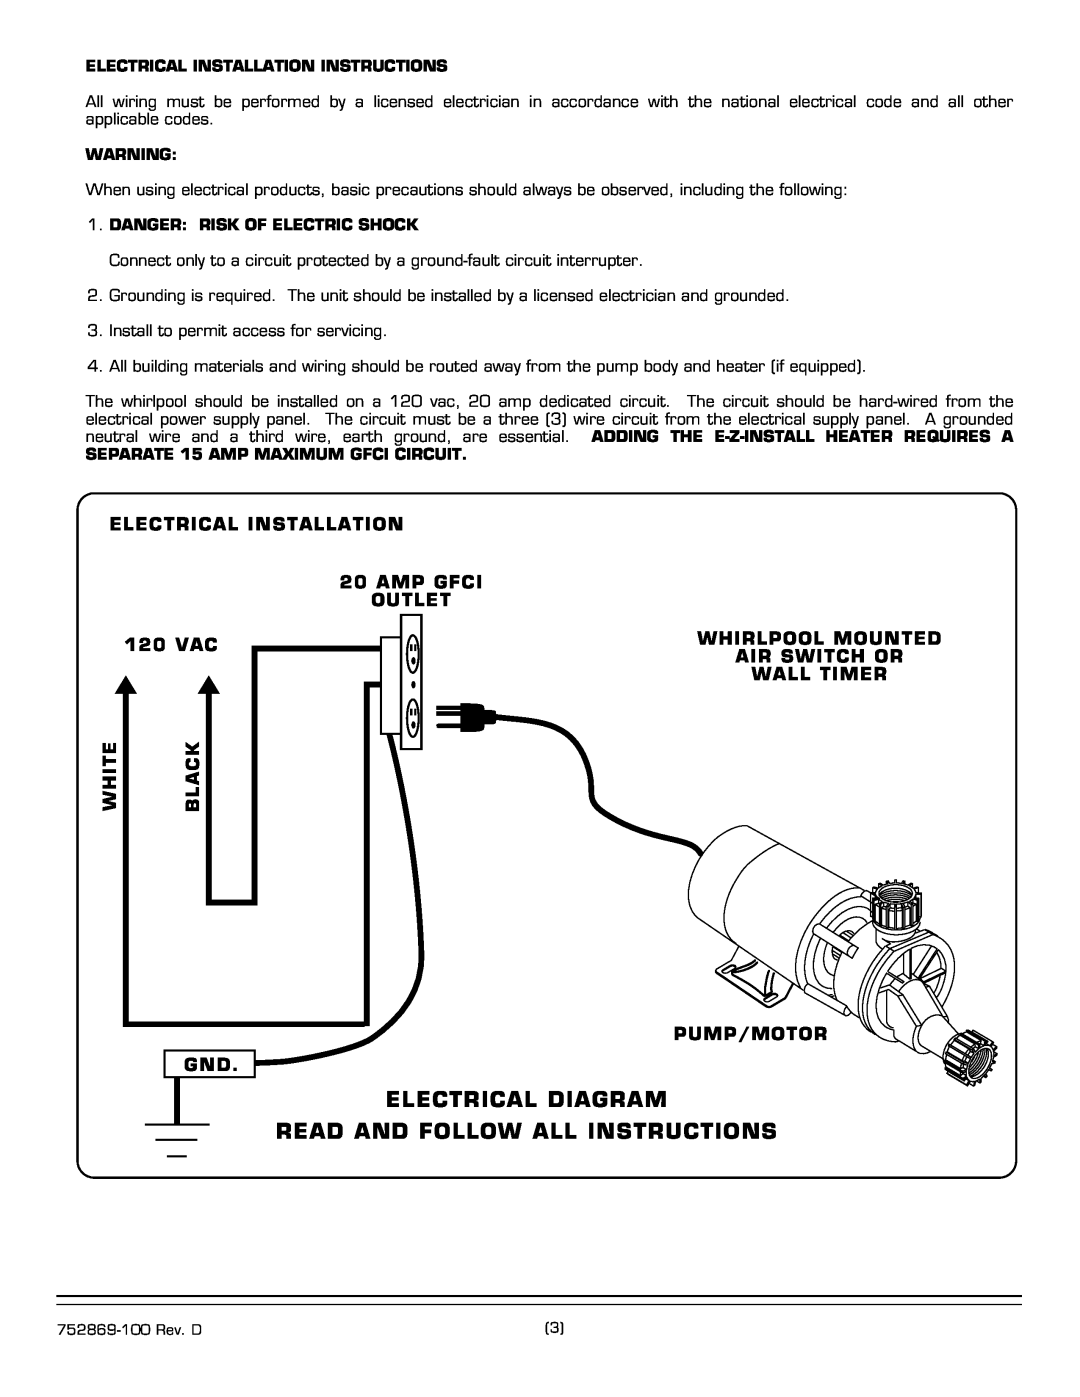 American Standard 7236E Series installation instructions Electrical Diagram Read And Follow All Instructions 